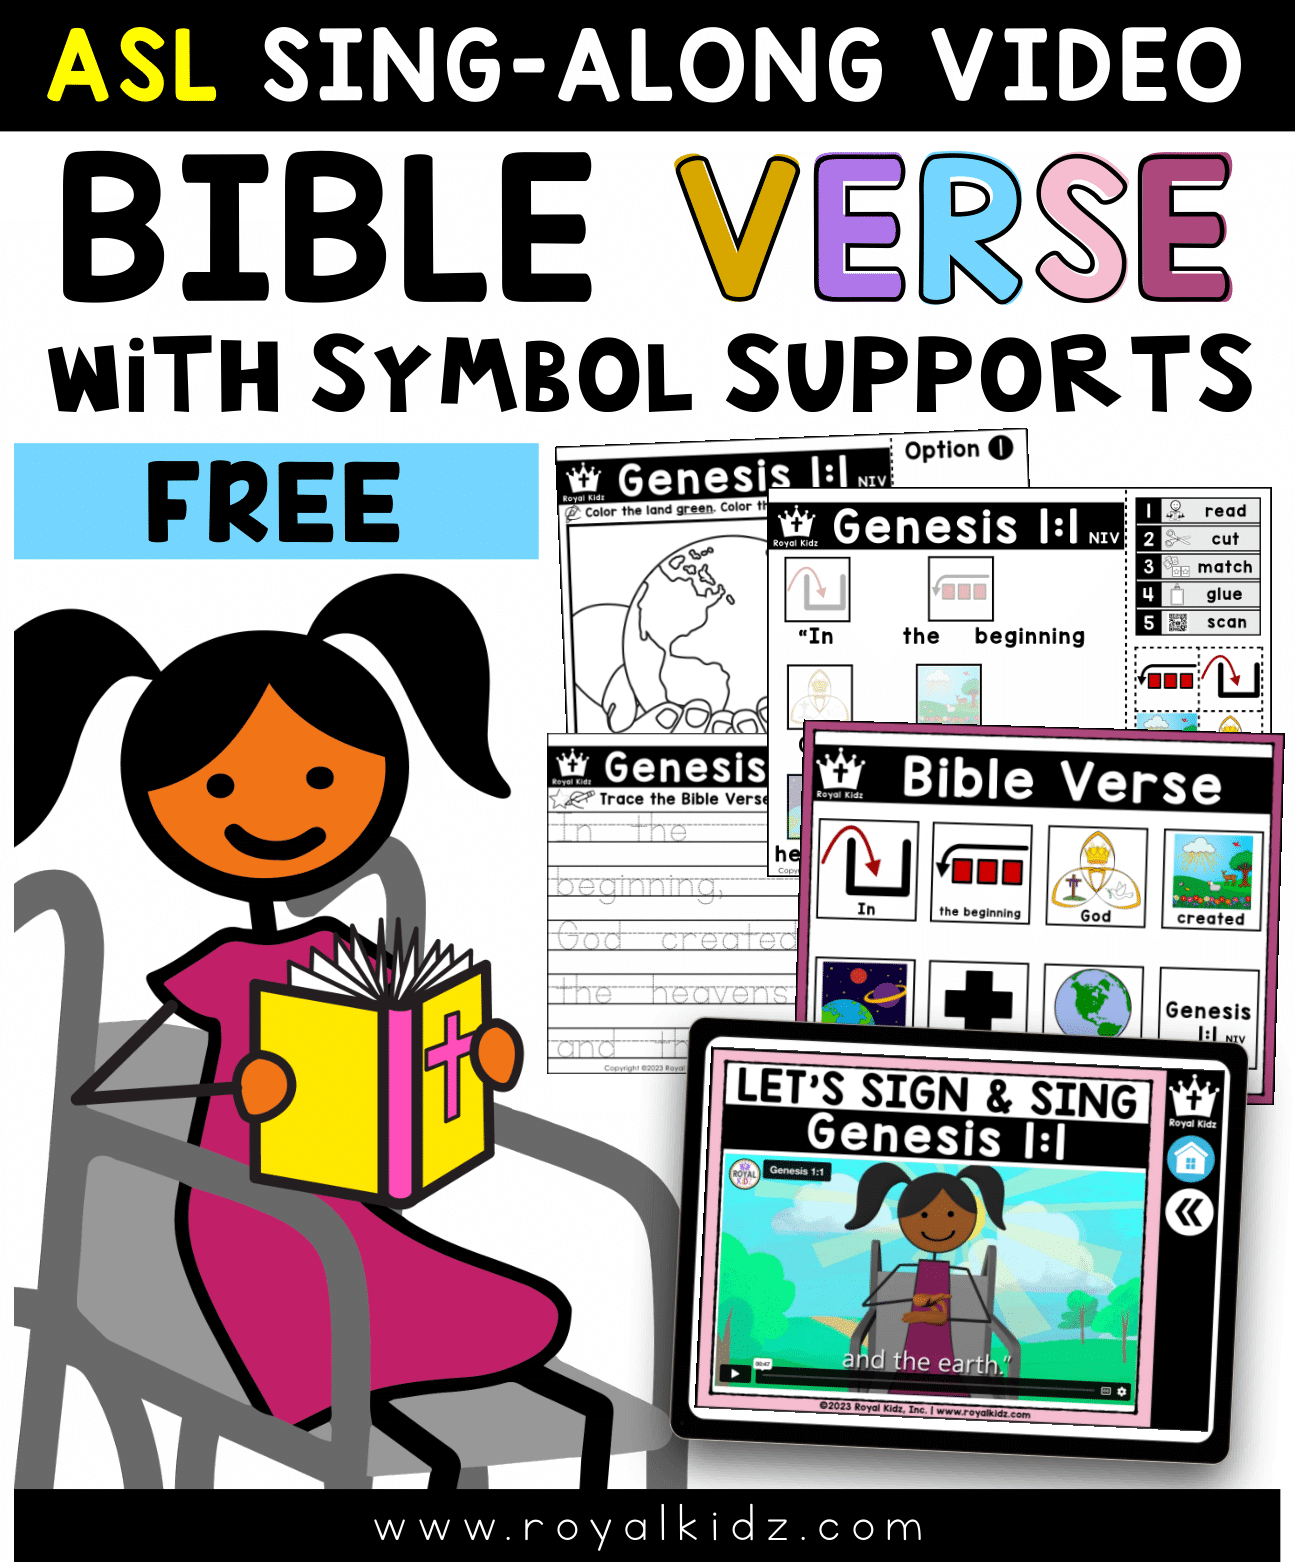 Free Genesis 1:1 ASL Bible Verse Special Needs Ministry Days of Creation for kids